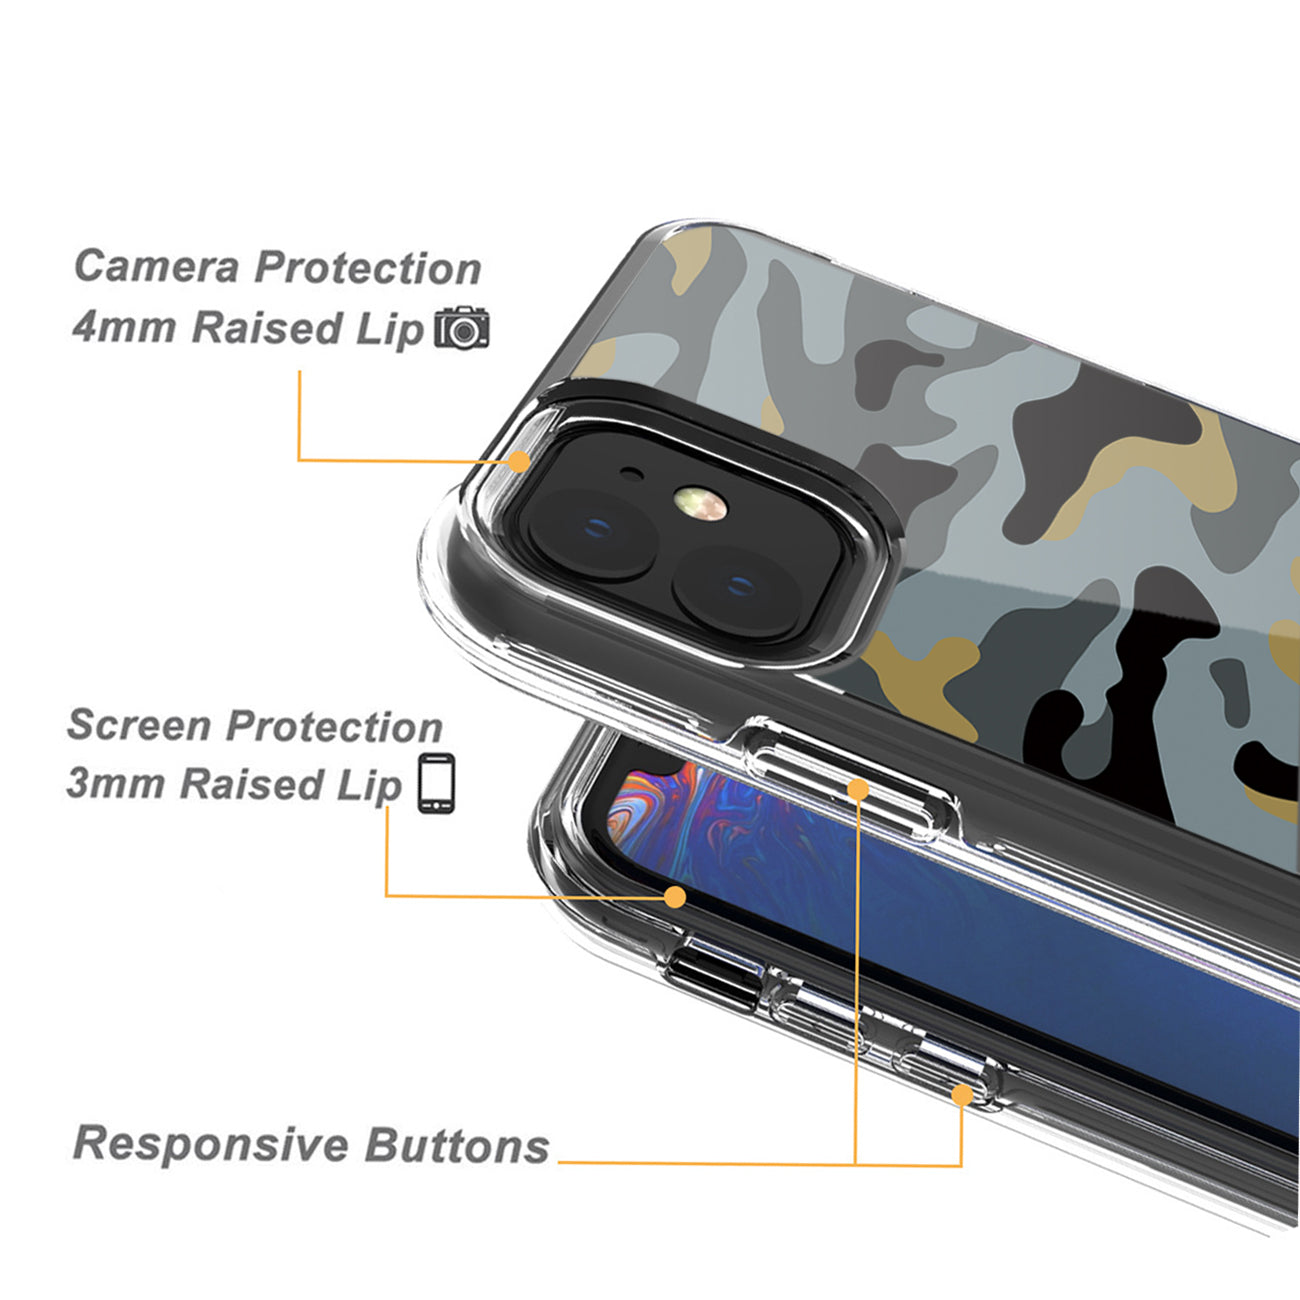 Camouflage Dual Layer Hybrid Hard Plastic and Soft TPU Rubber Case Cover for APPLE IPHONE 11 In Blue